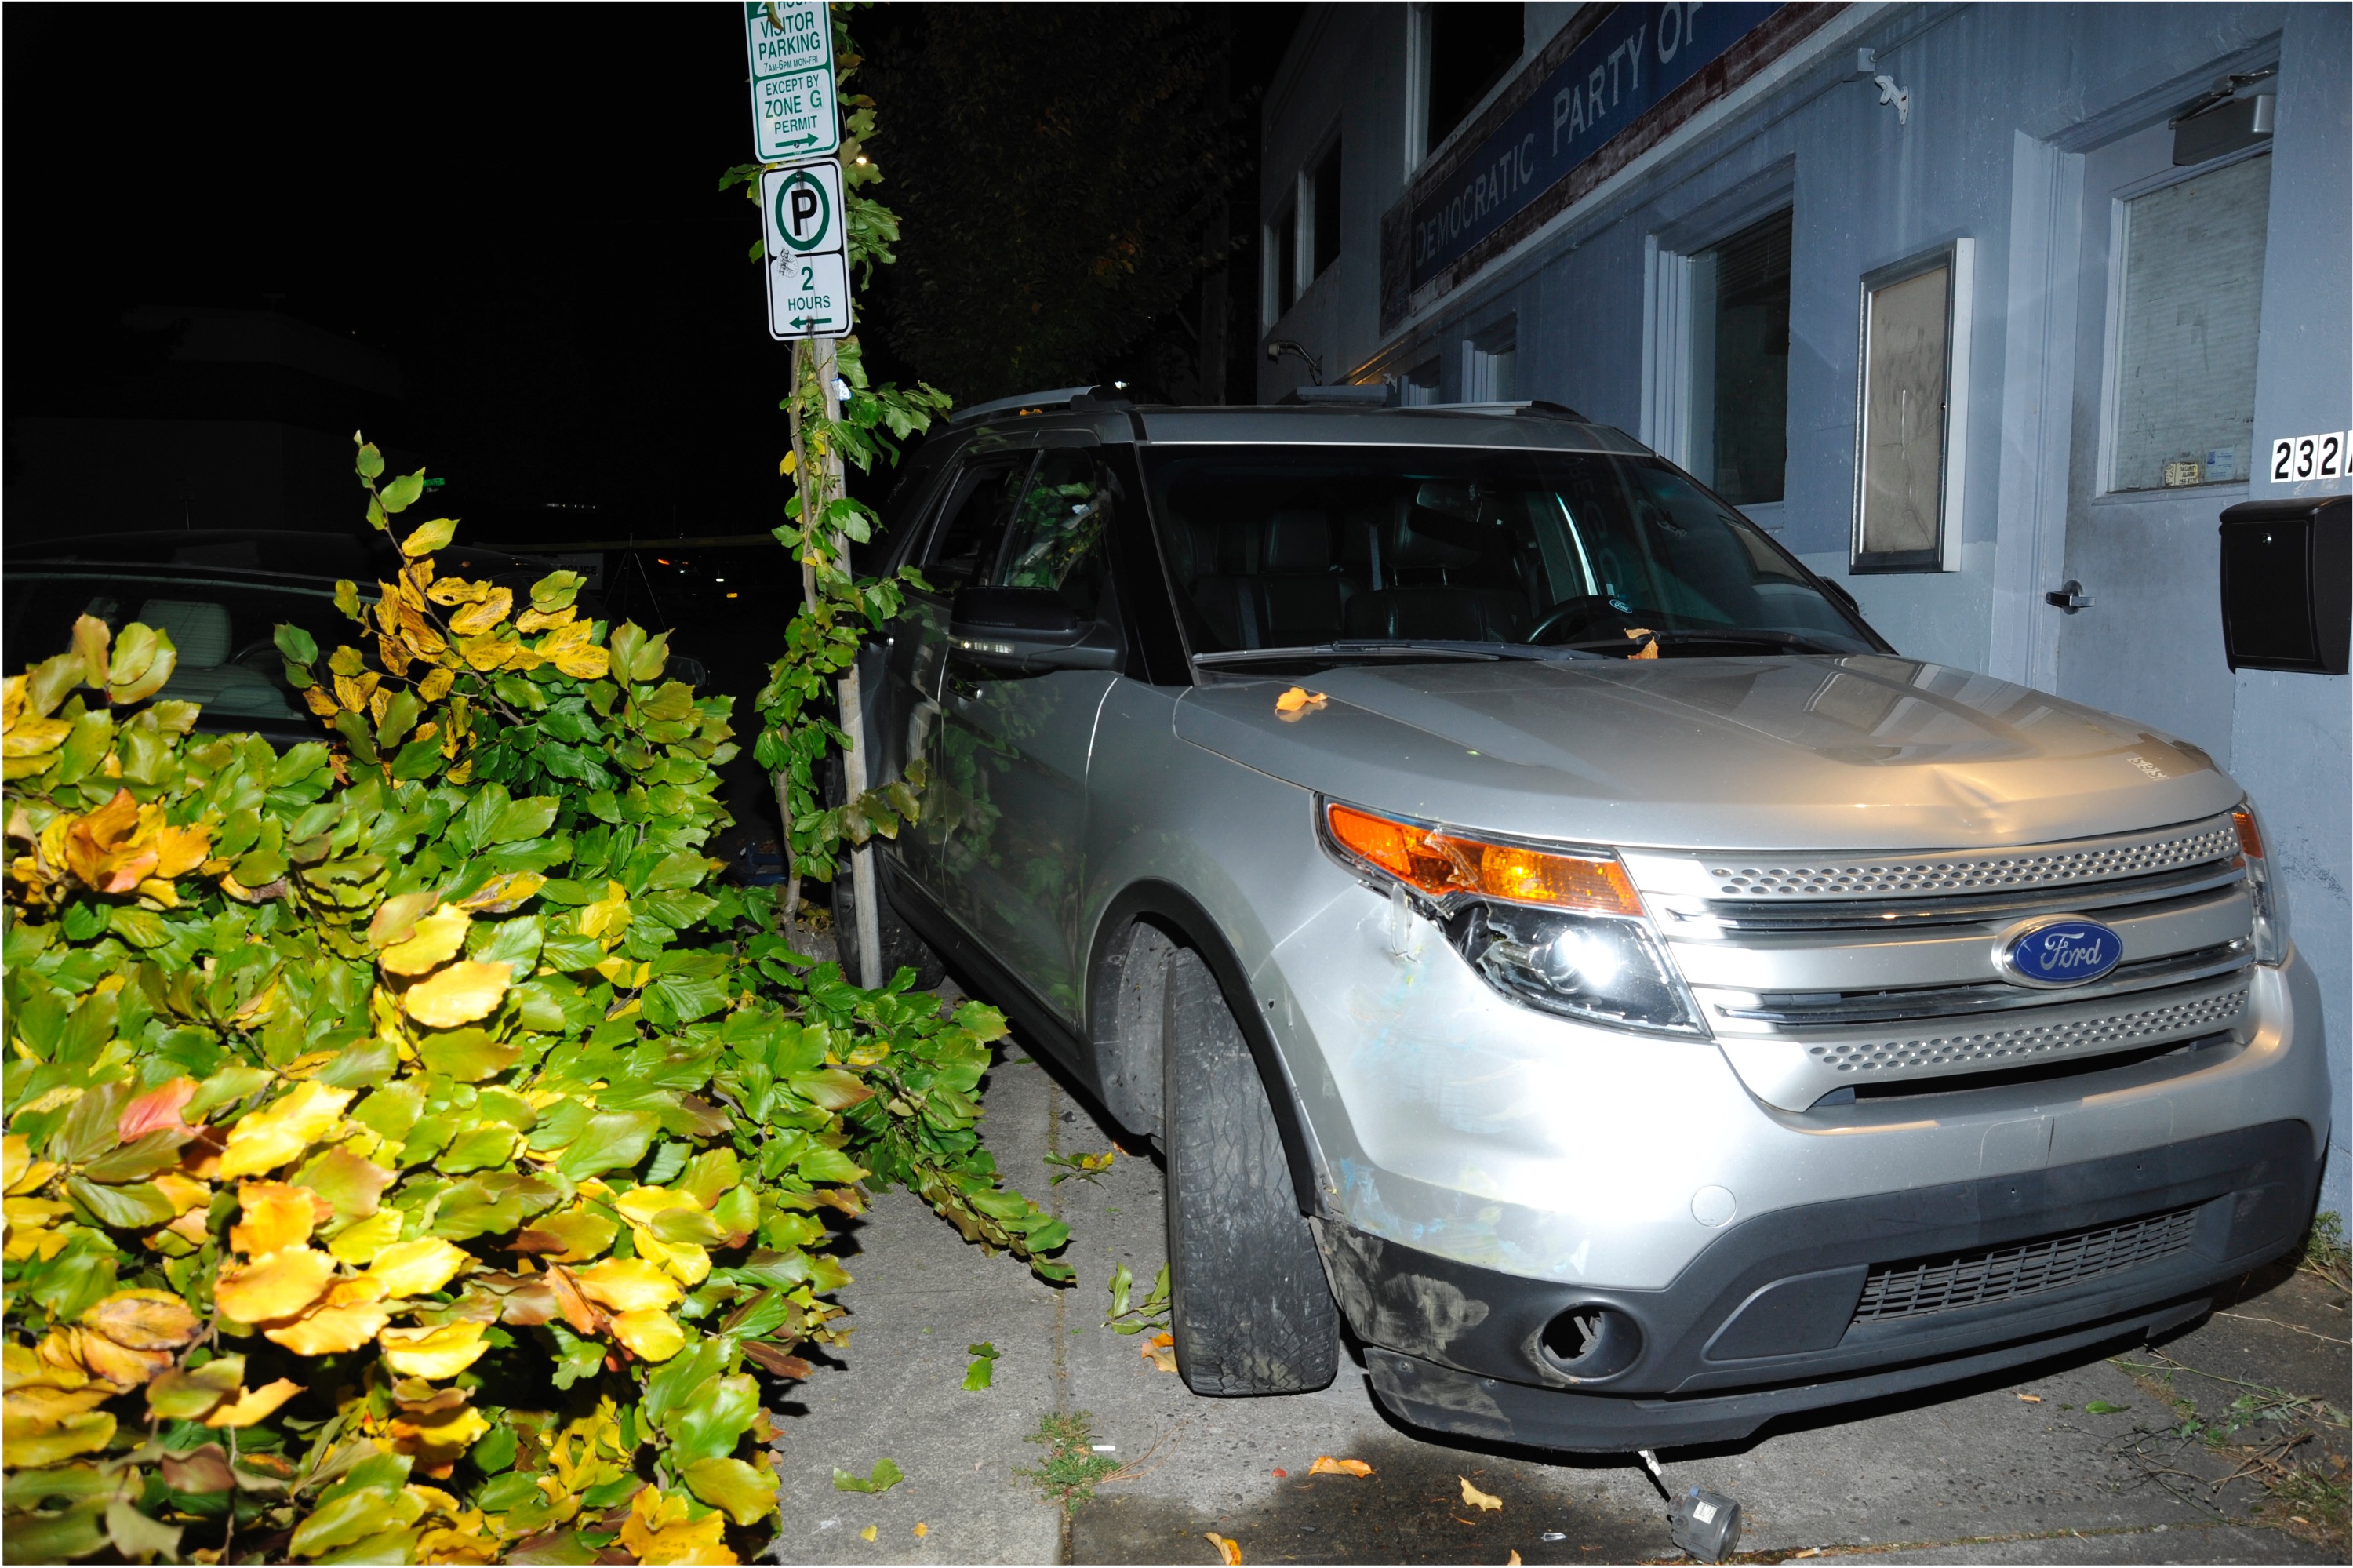 A crime scene photograph shows Christopher Knipe's Ford Explorer left at the scene where he hit and killed Sean Kealiher on Oct. 12, 2022 in Northeast Portland. Knipe, who confessed to driving the car and hitting Kealiher, originally claimed his car was stolen and denied being in the area.